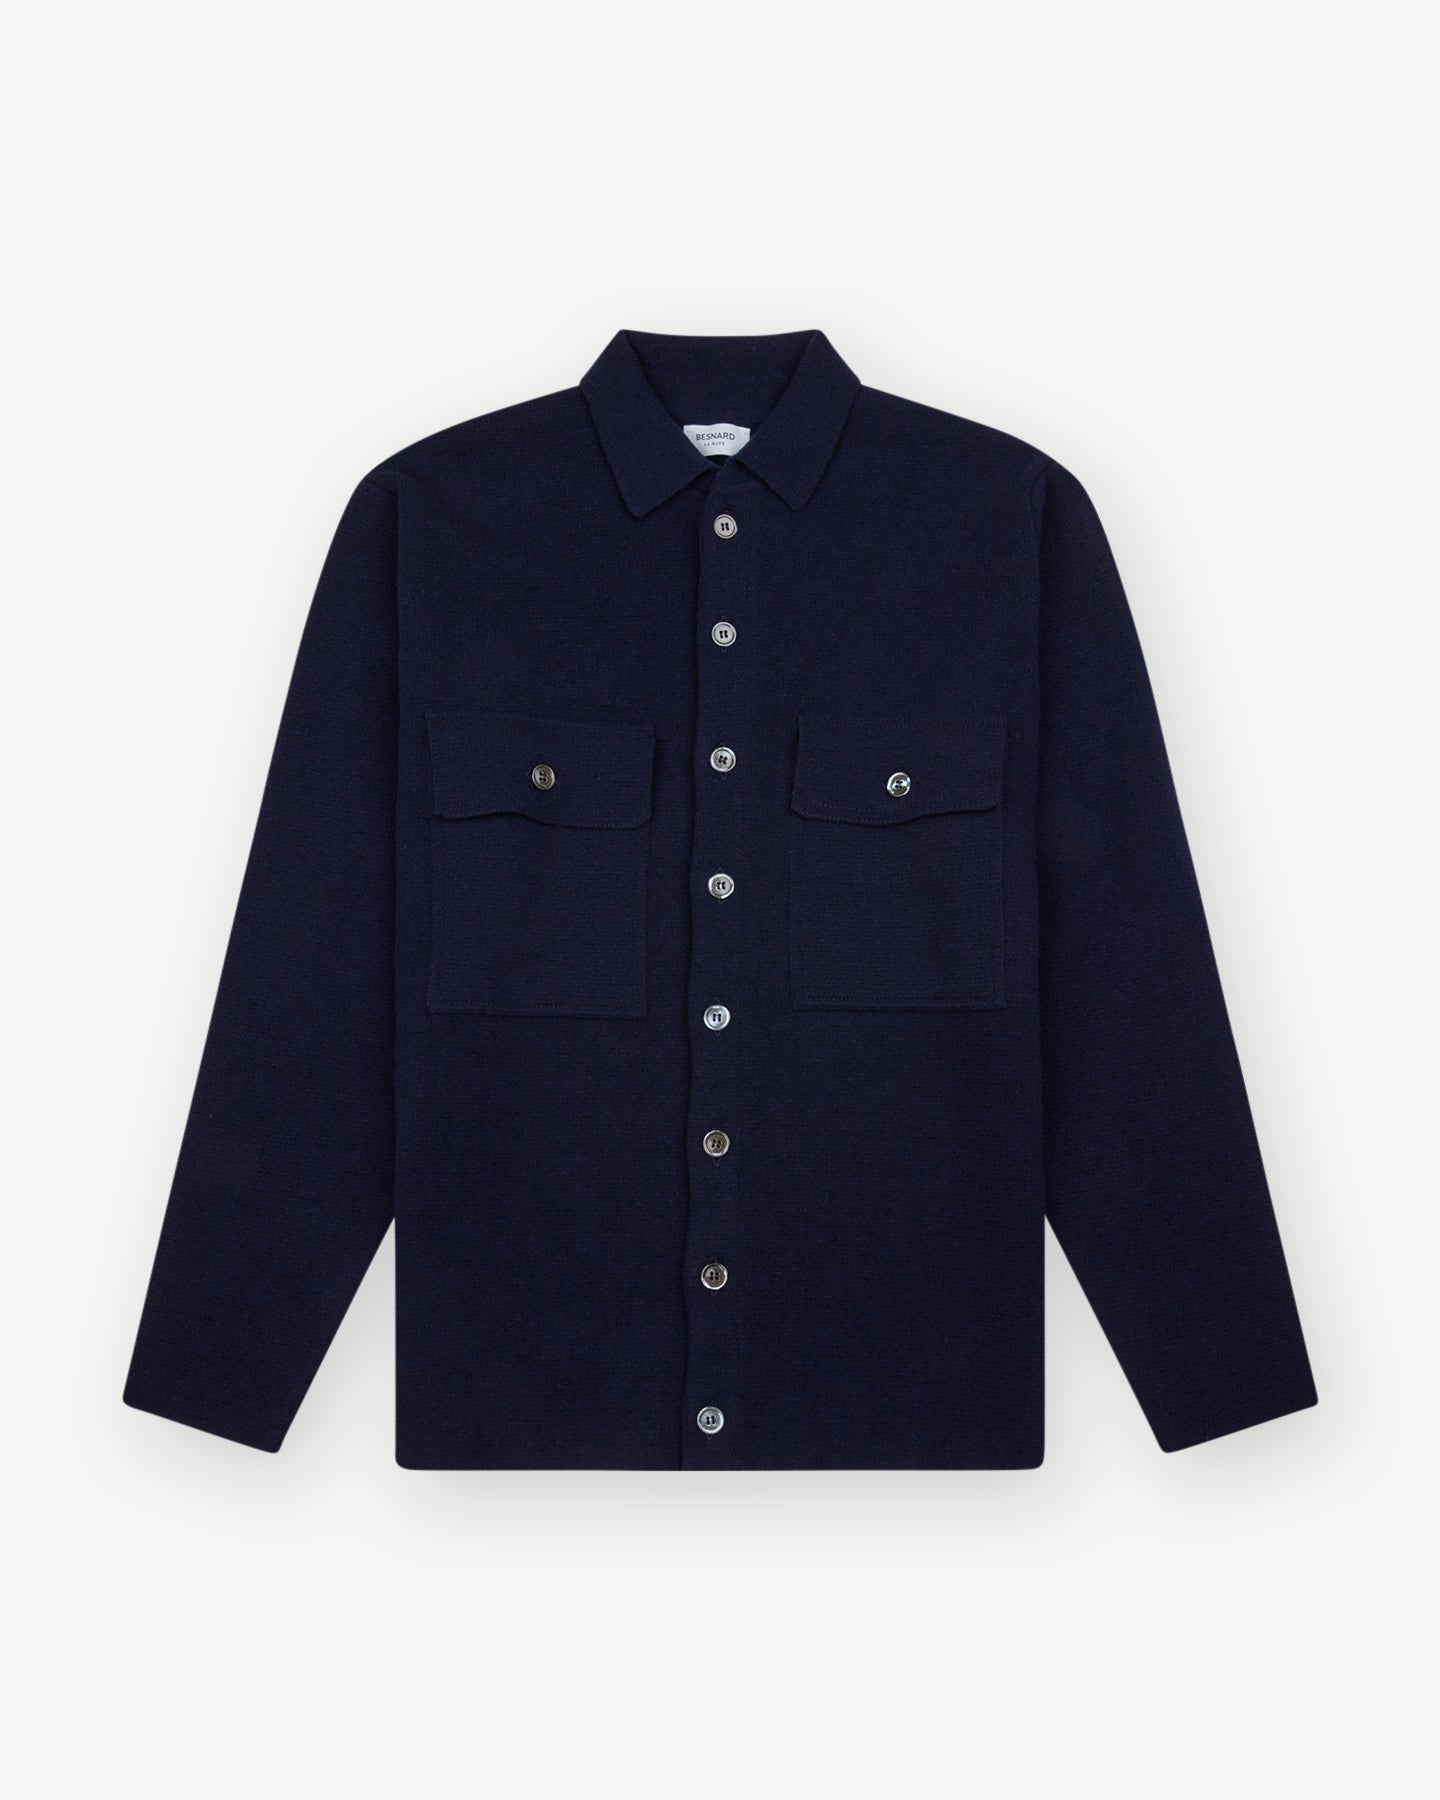 Navy Wool Cashmere Two Pocket Overshirt